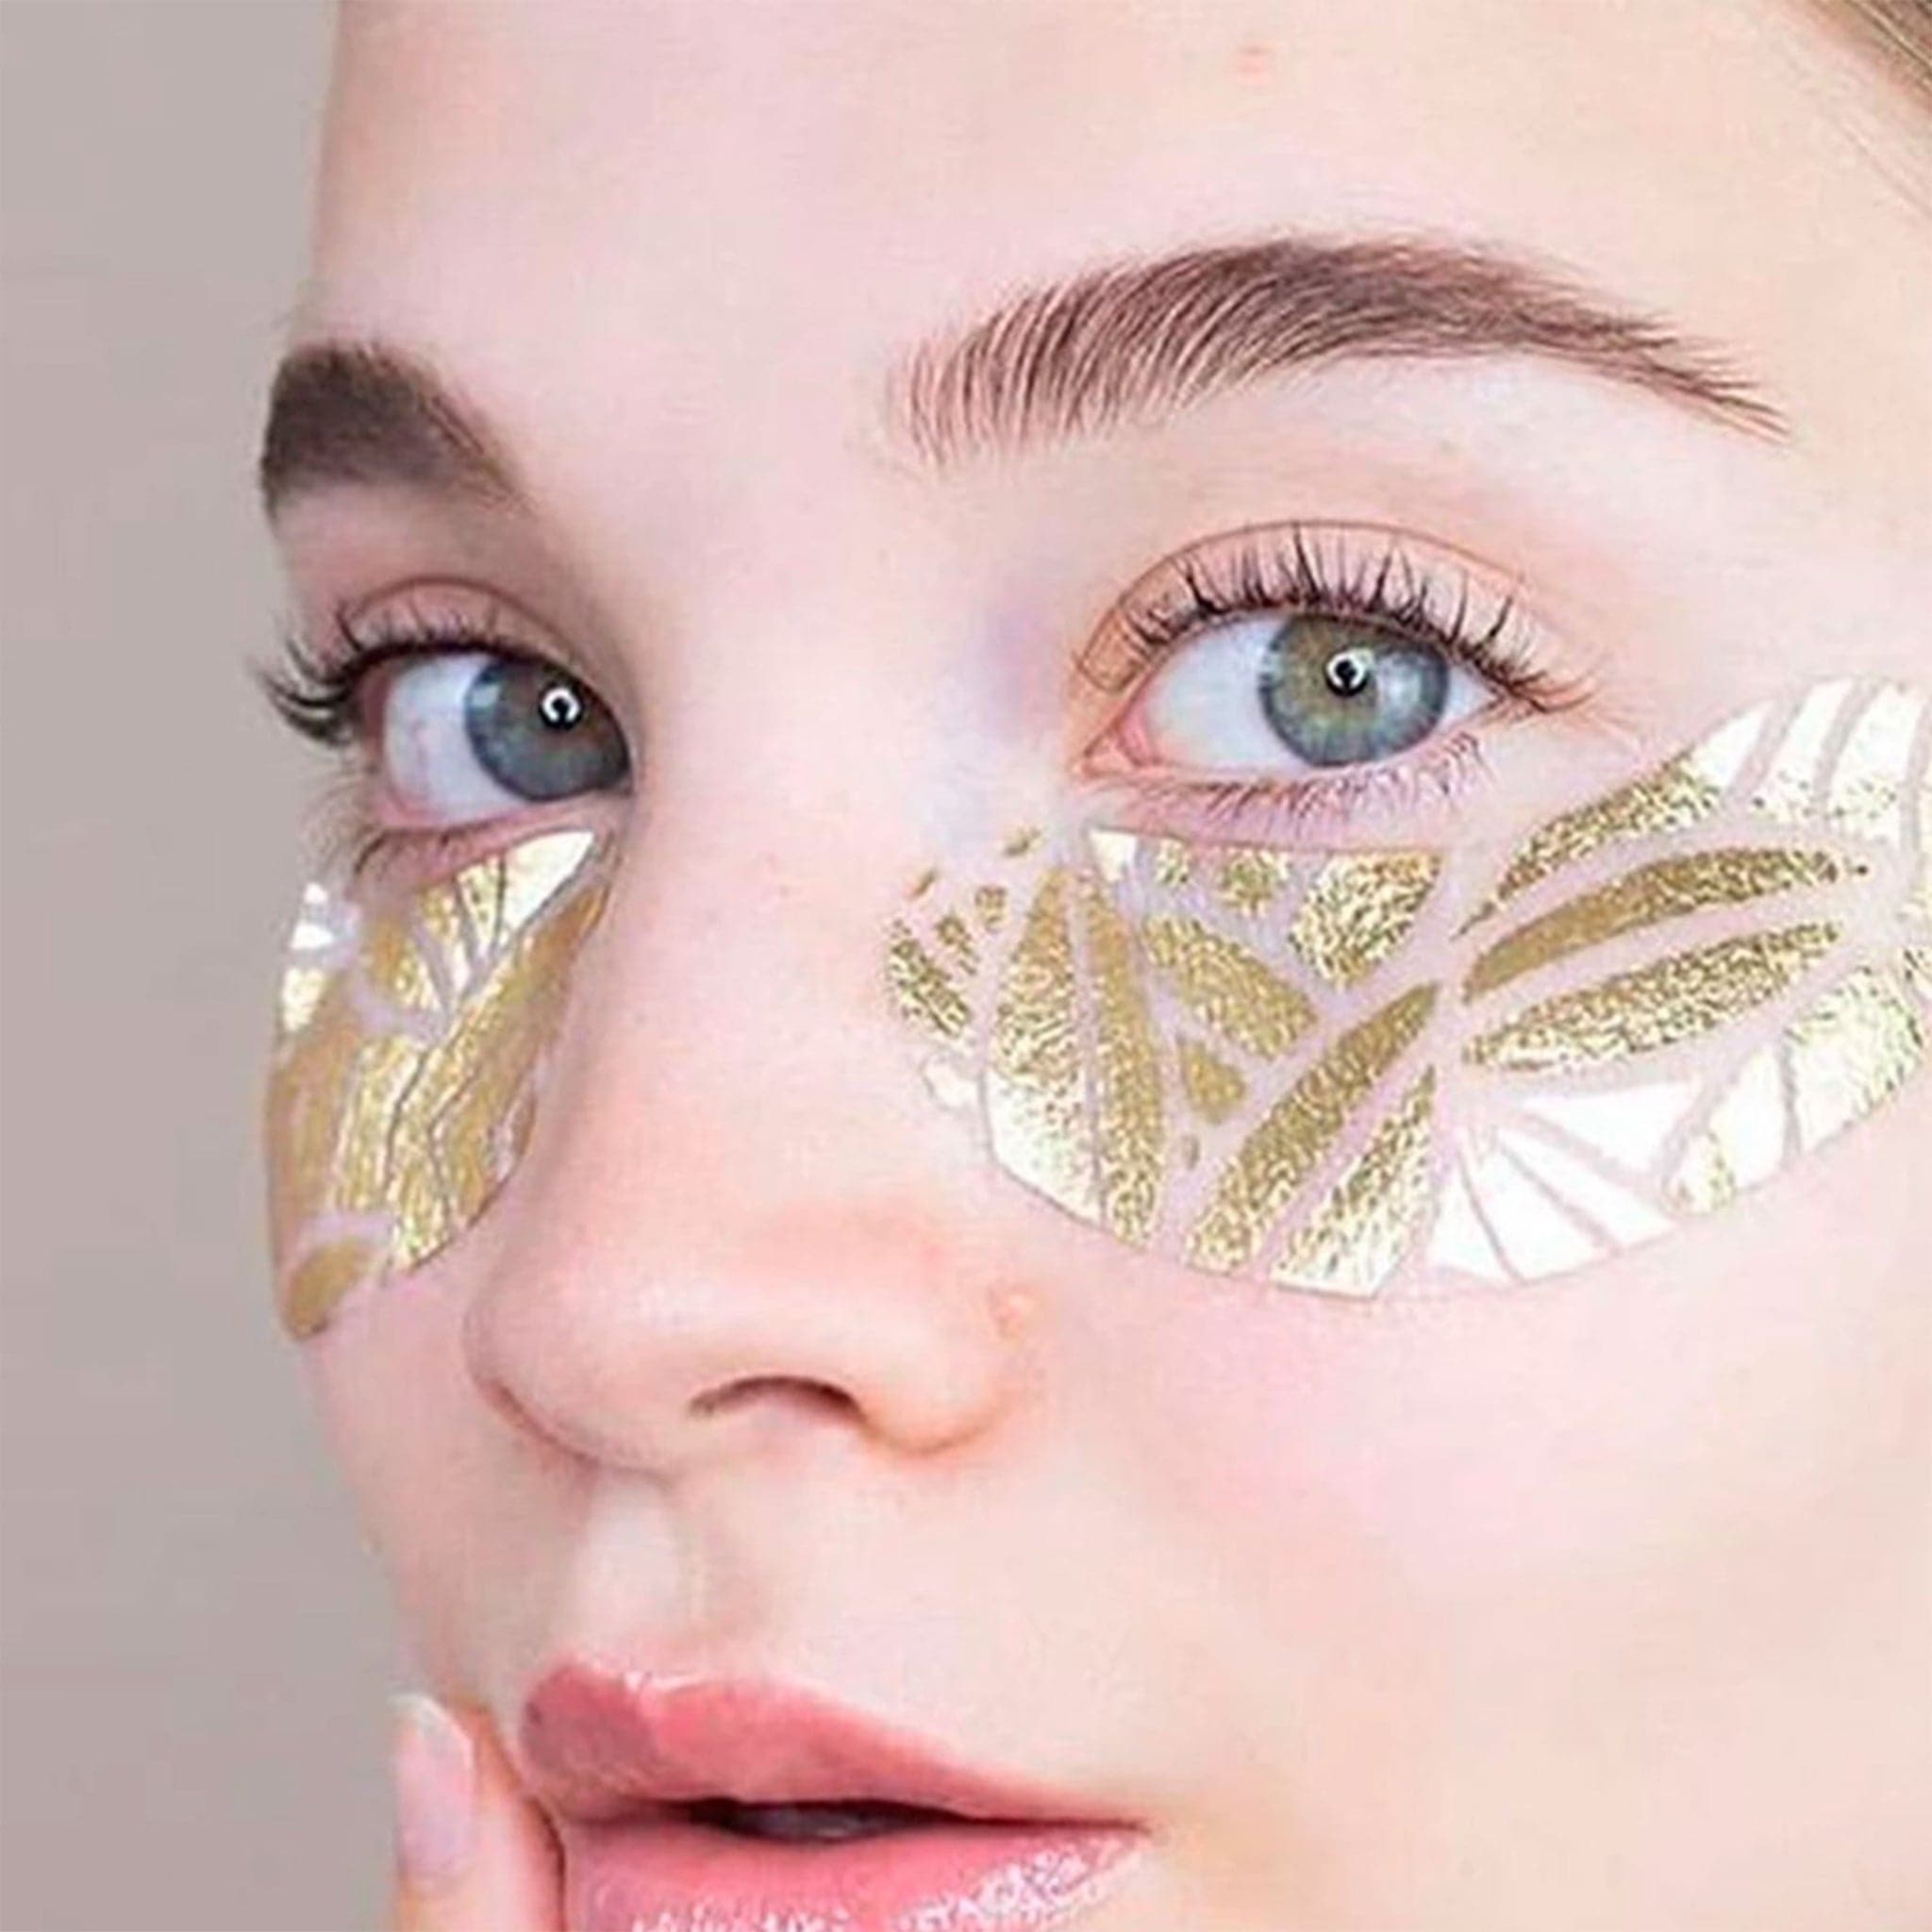 The gold eye patches worn on a model's under eyes.